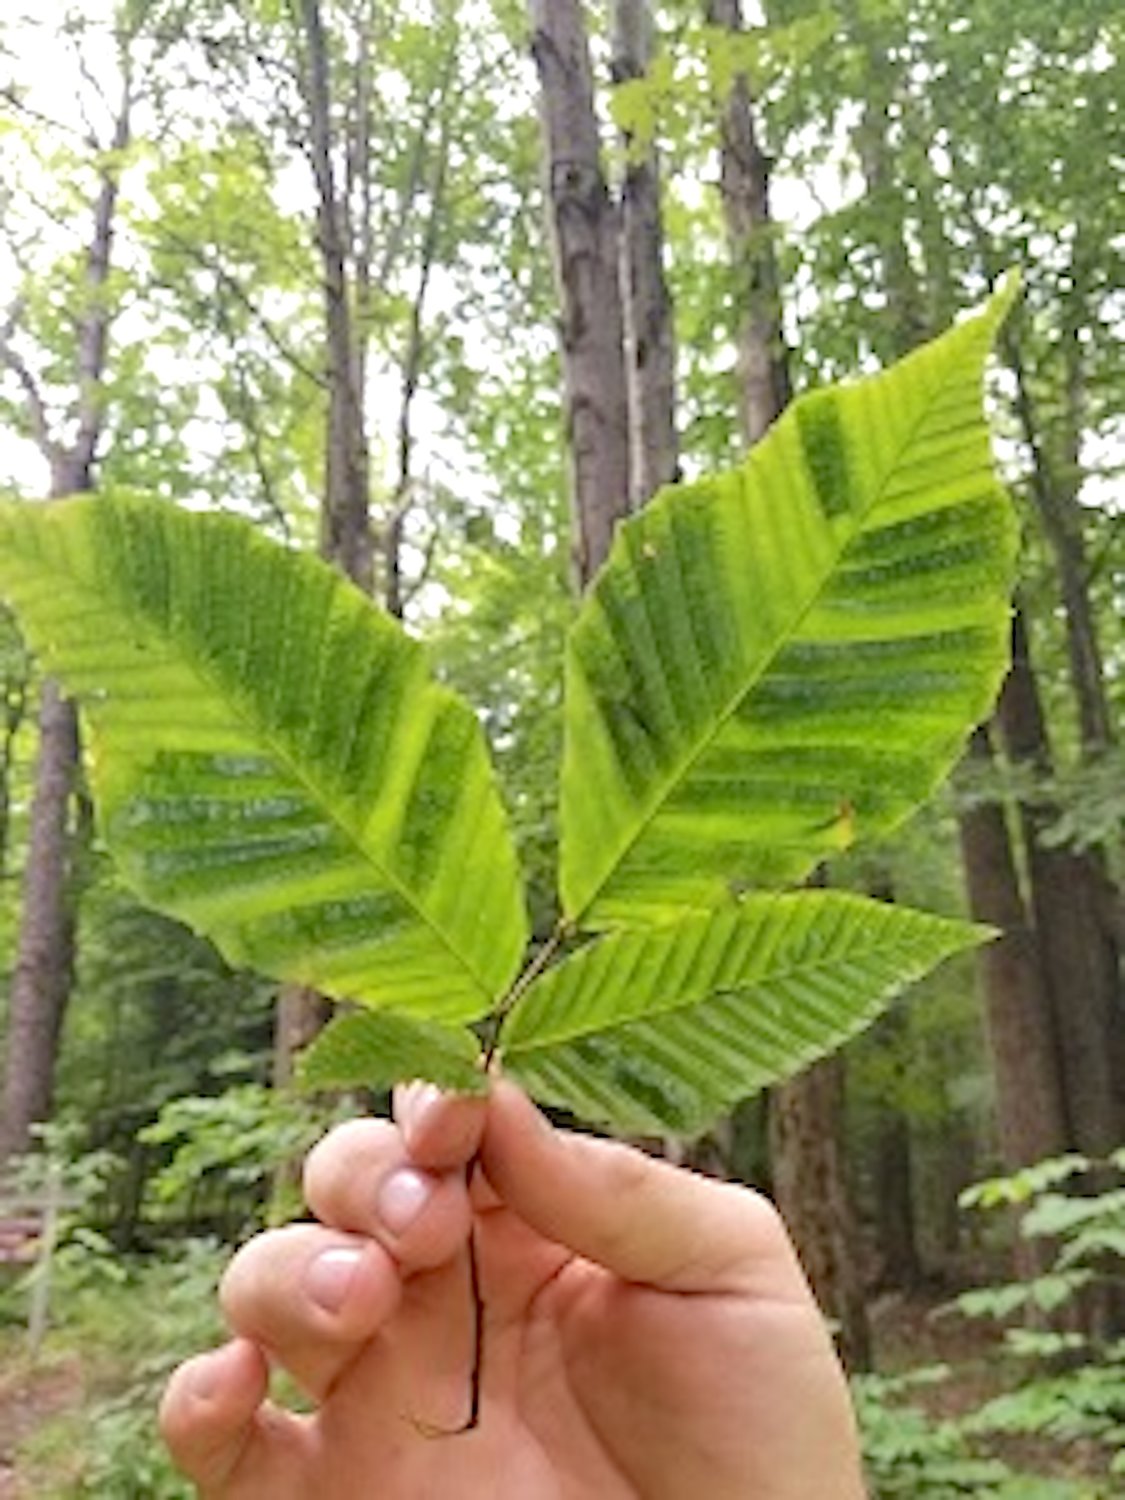 Beech leaves exhibiting the striping associated with beech leaf disease.